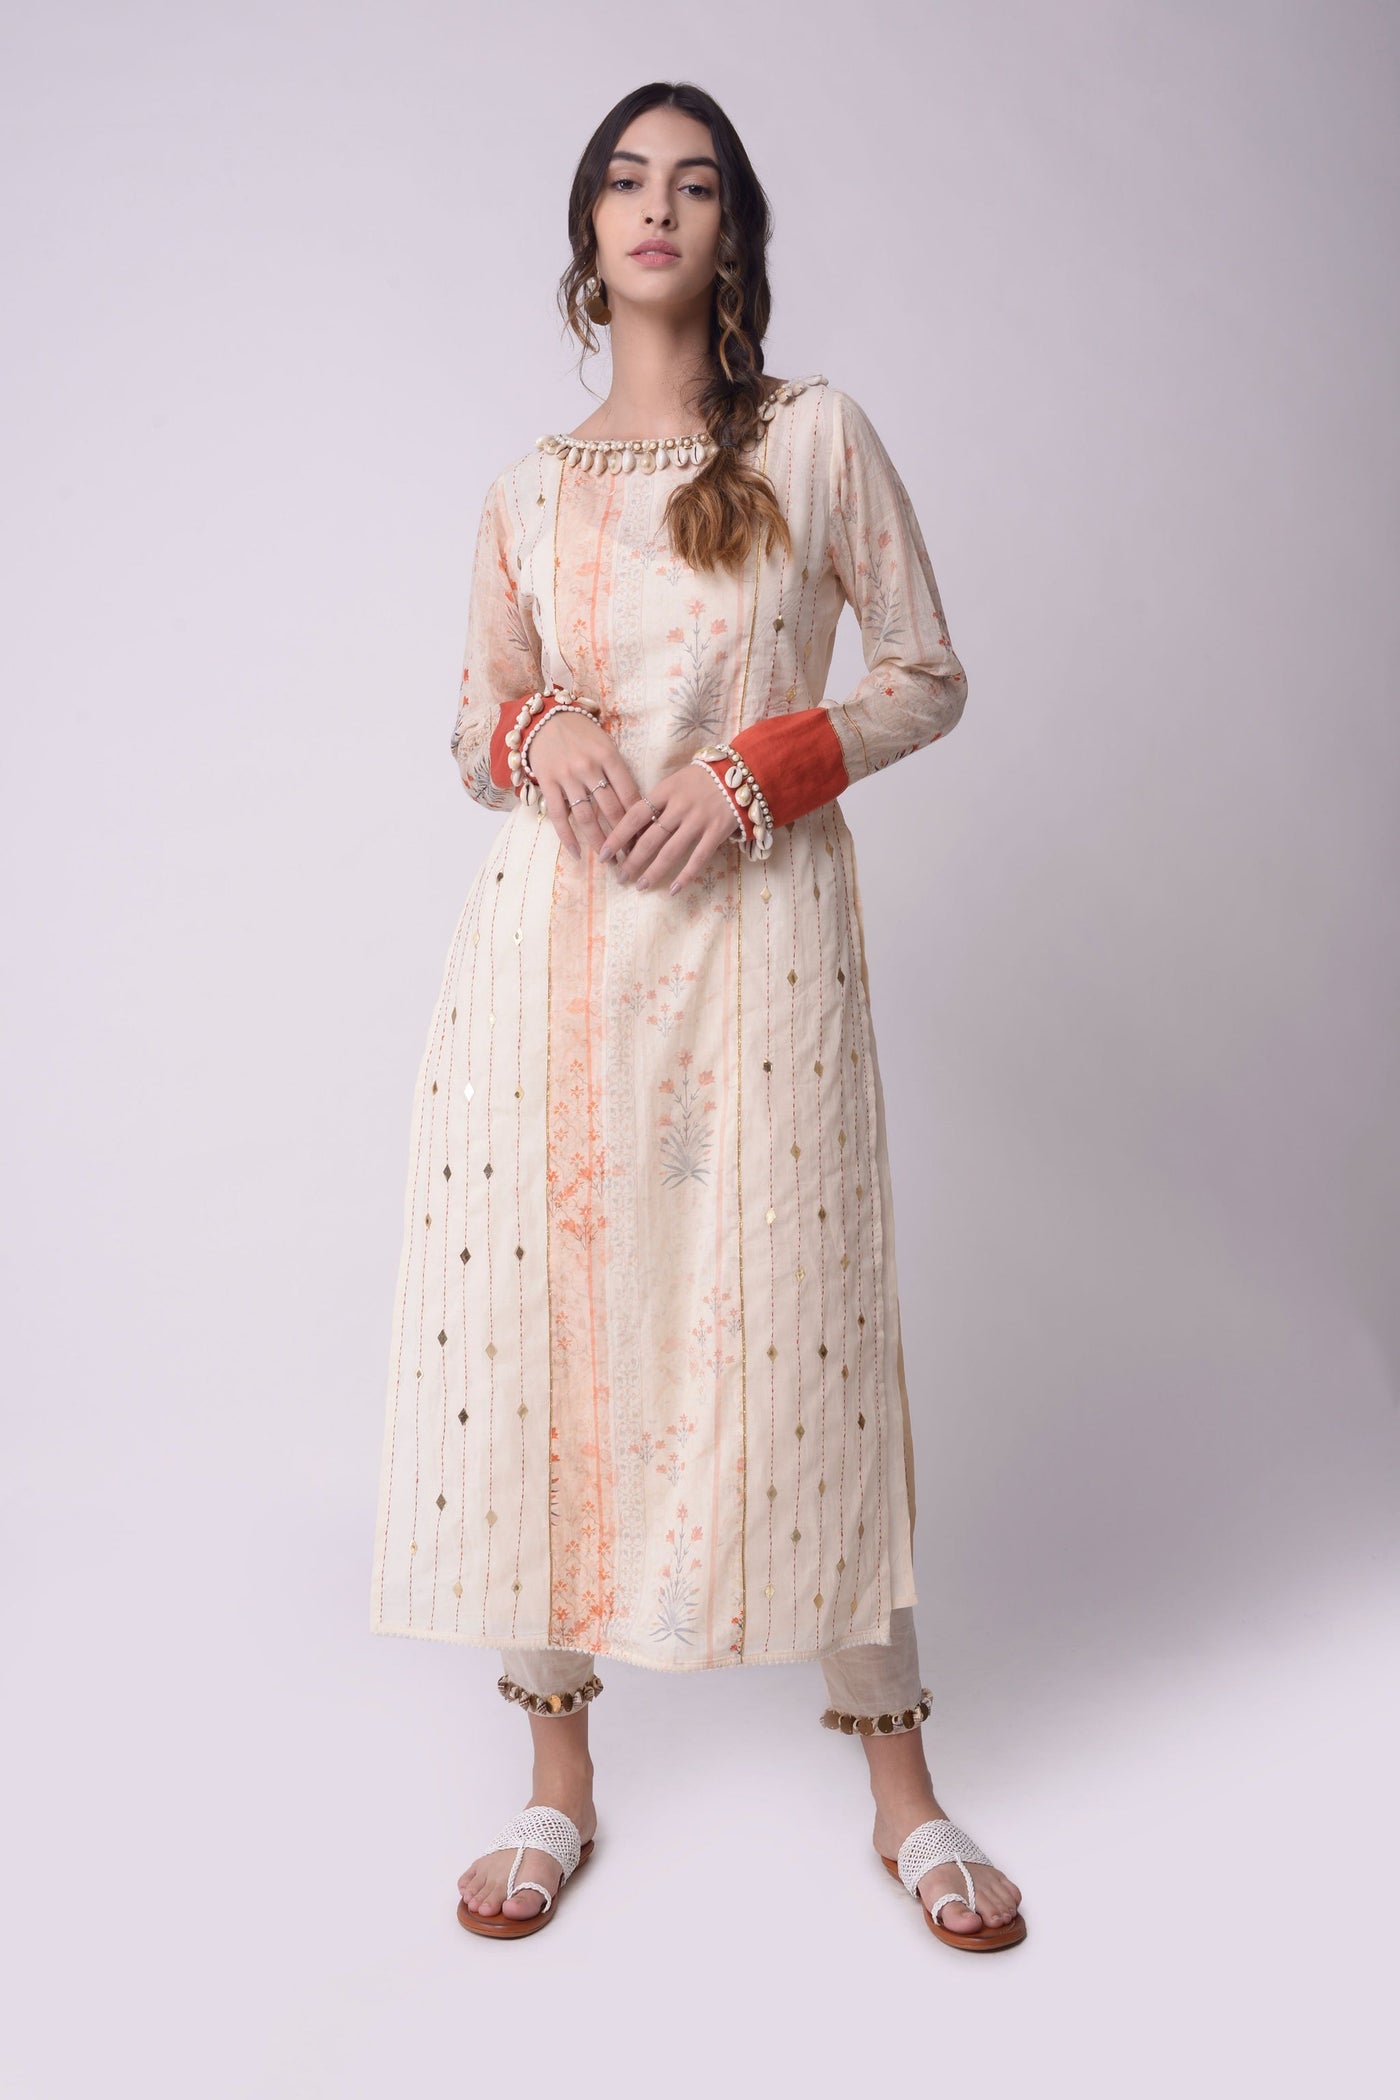 Ivory straight kurta set - Indian Clothing in Denver, CO, Aurora, CO, Boulder, CO, Fort Collins, CO, Colorado Springs, CO, Parker, CO, Highlands Ranch, CO, Cherry Creek, CO, Centennial, CO, and Longmont, CO. Nationwide shipping USA - India Fashion X